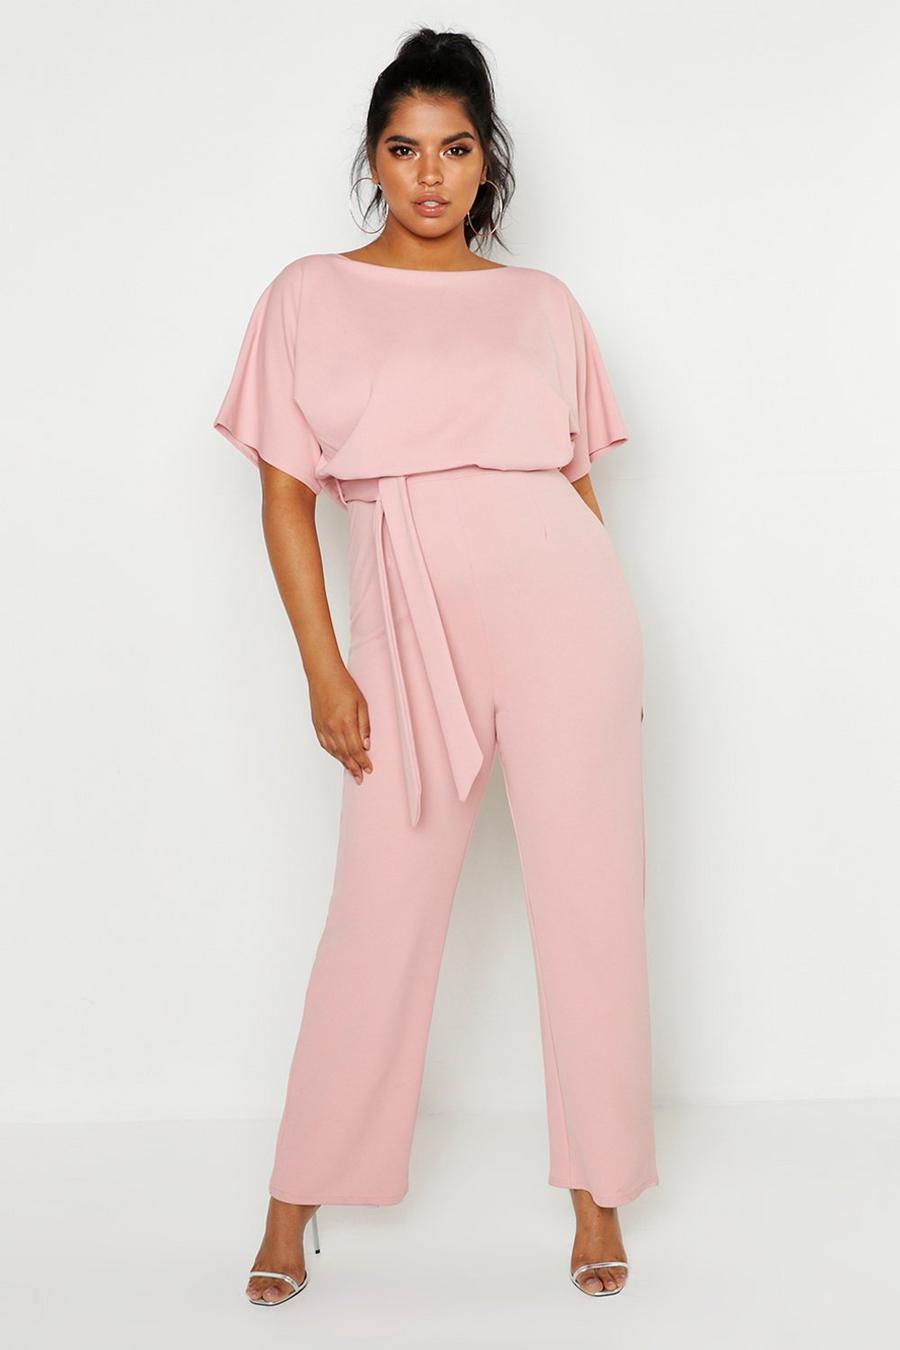 Boohoo Wool Plus Drape Detail Jumpsuit in Rose Pink Womens Clothing Jumpsuits and rompers Full-length jumpsuits and rompers 